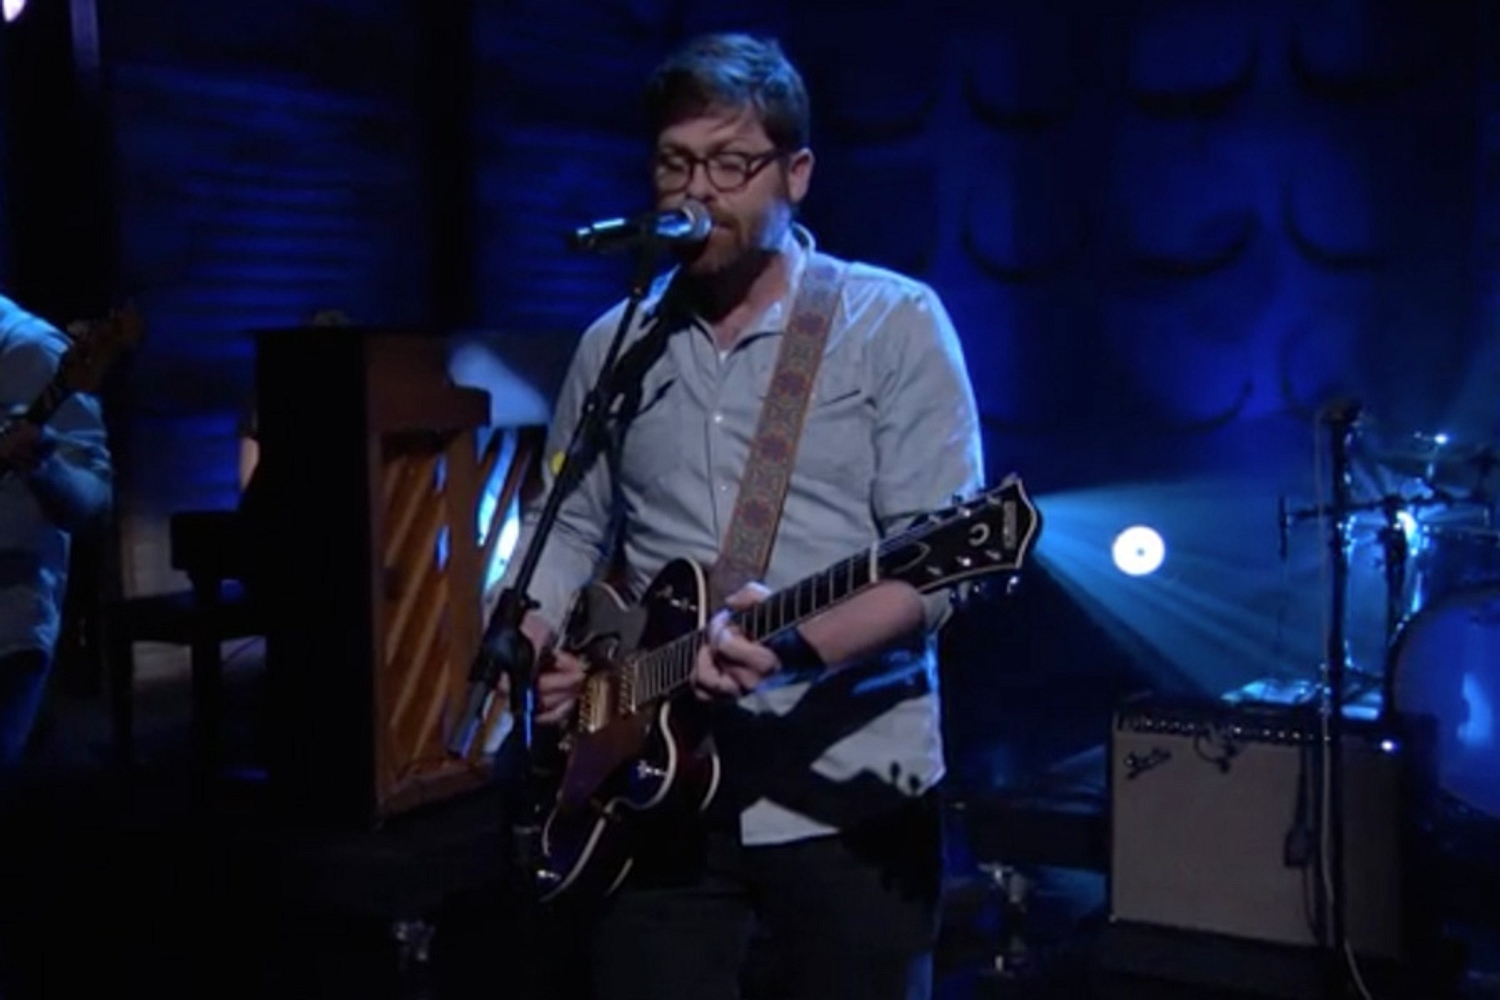 The Decemberists perform ‘Make You Better’ live on Conan